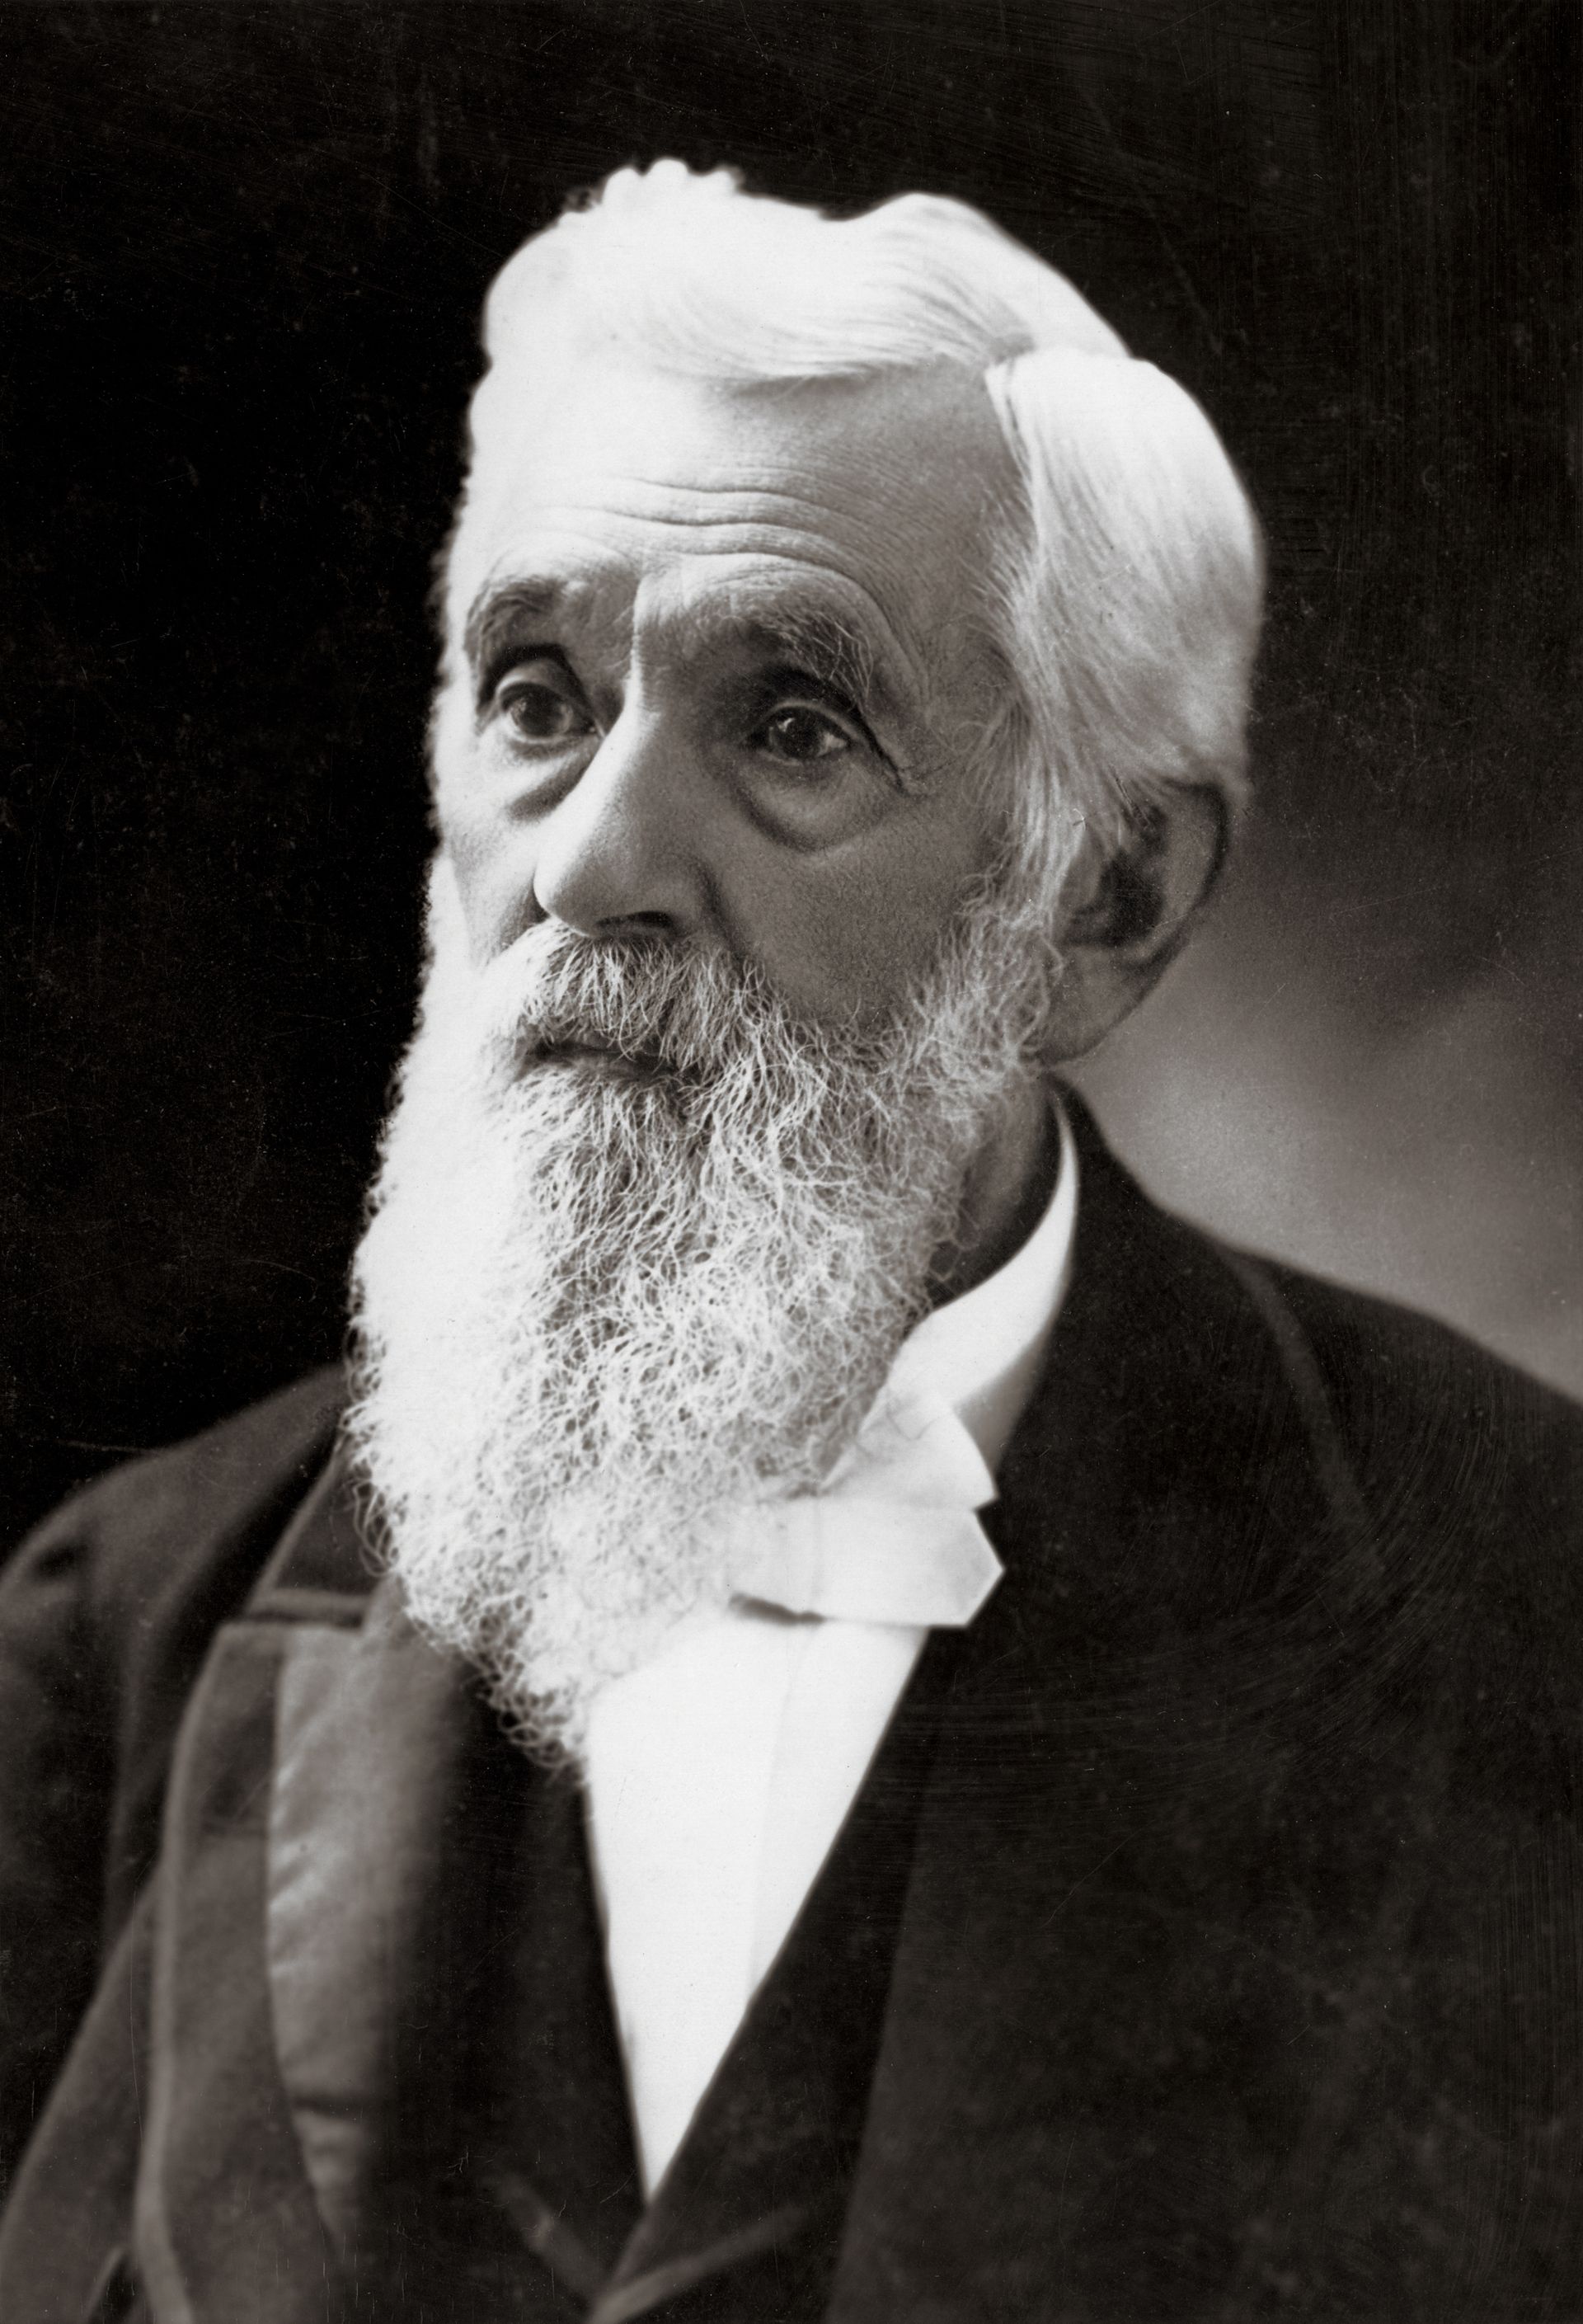 President Lorenzo Snow in a white shirt and dark suit. Teachings of Presidents of the Church: Lorenzo Snow (2012), iv